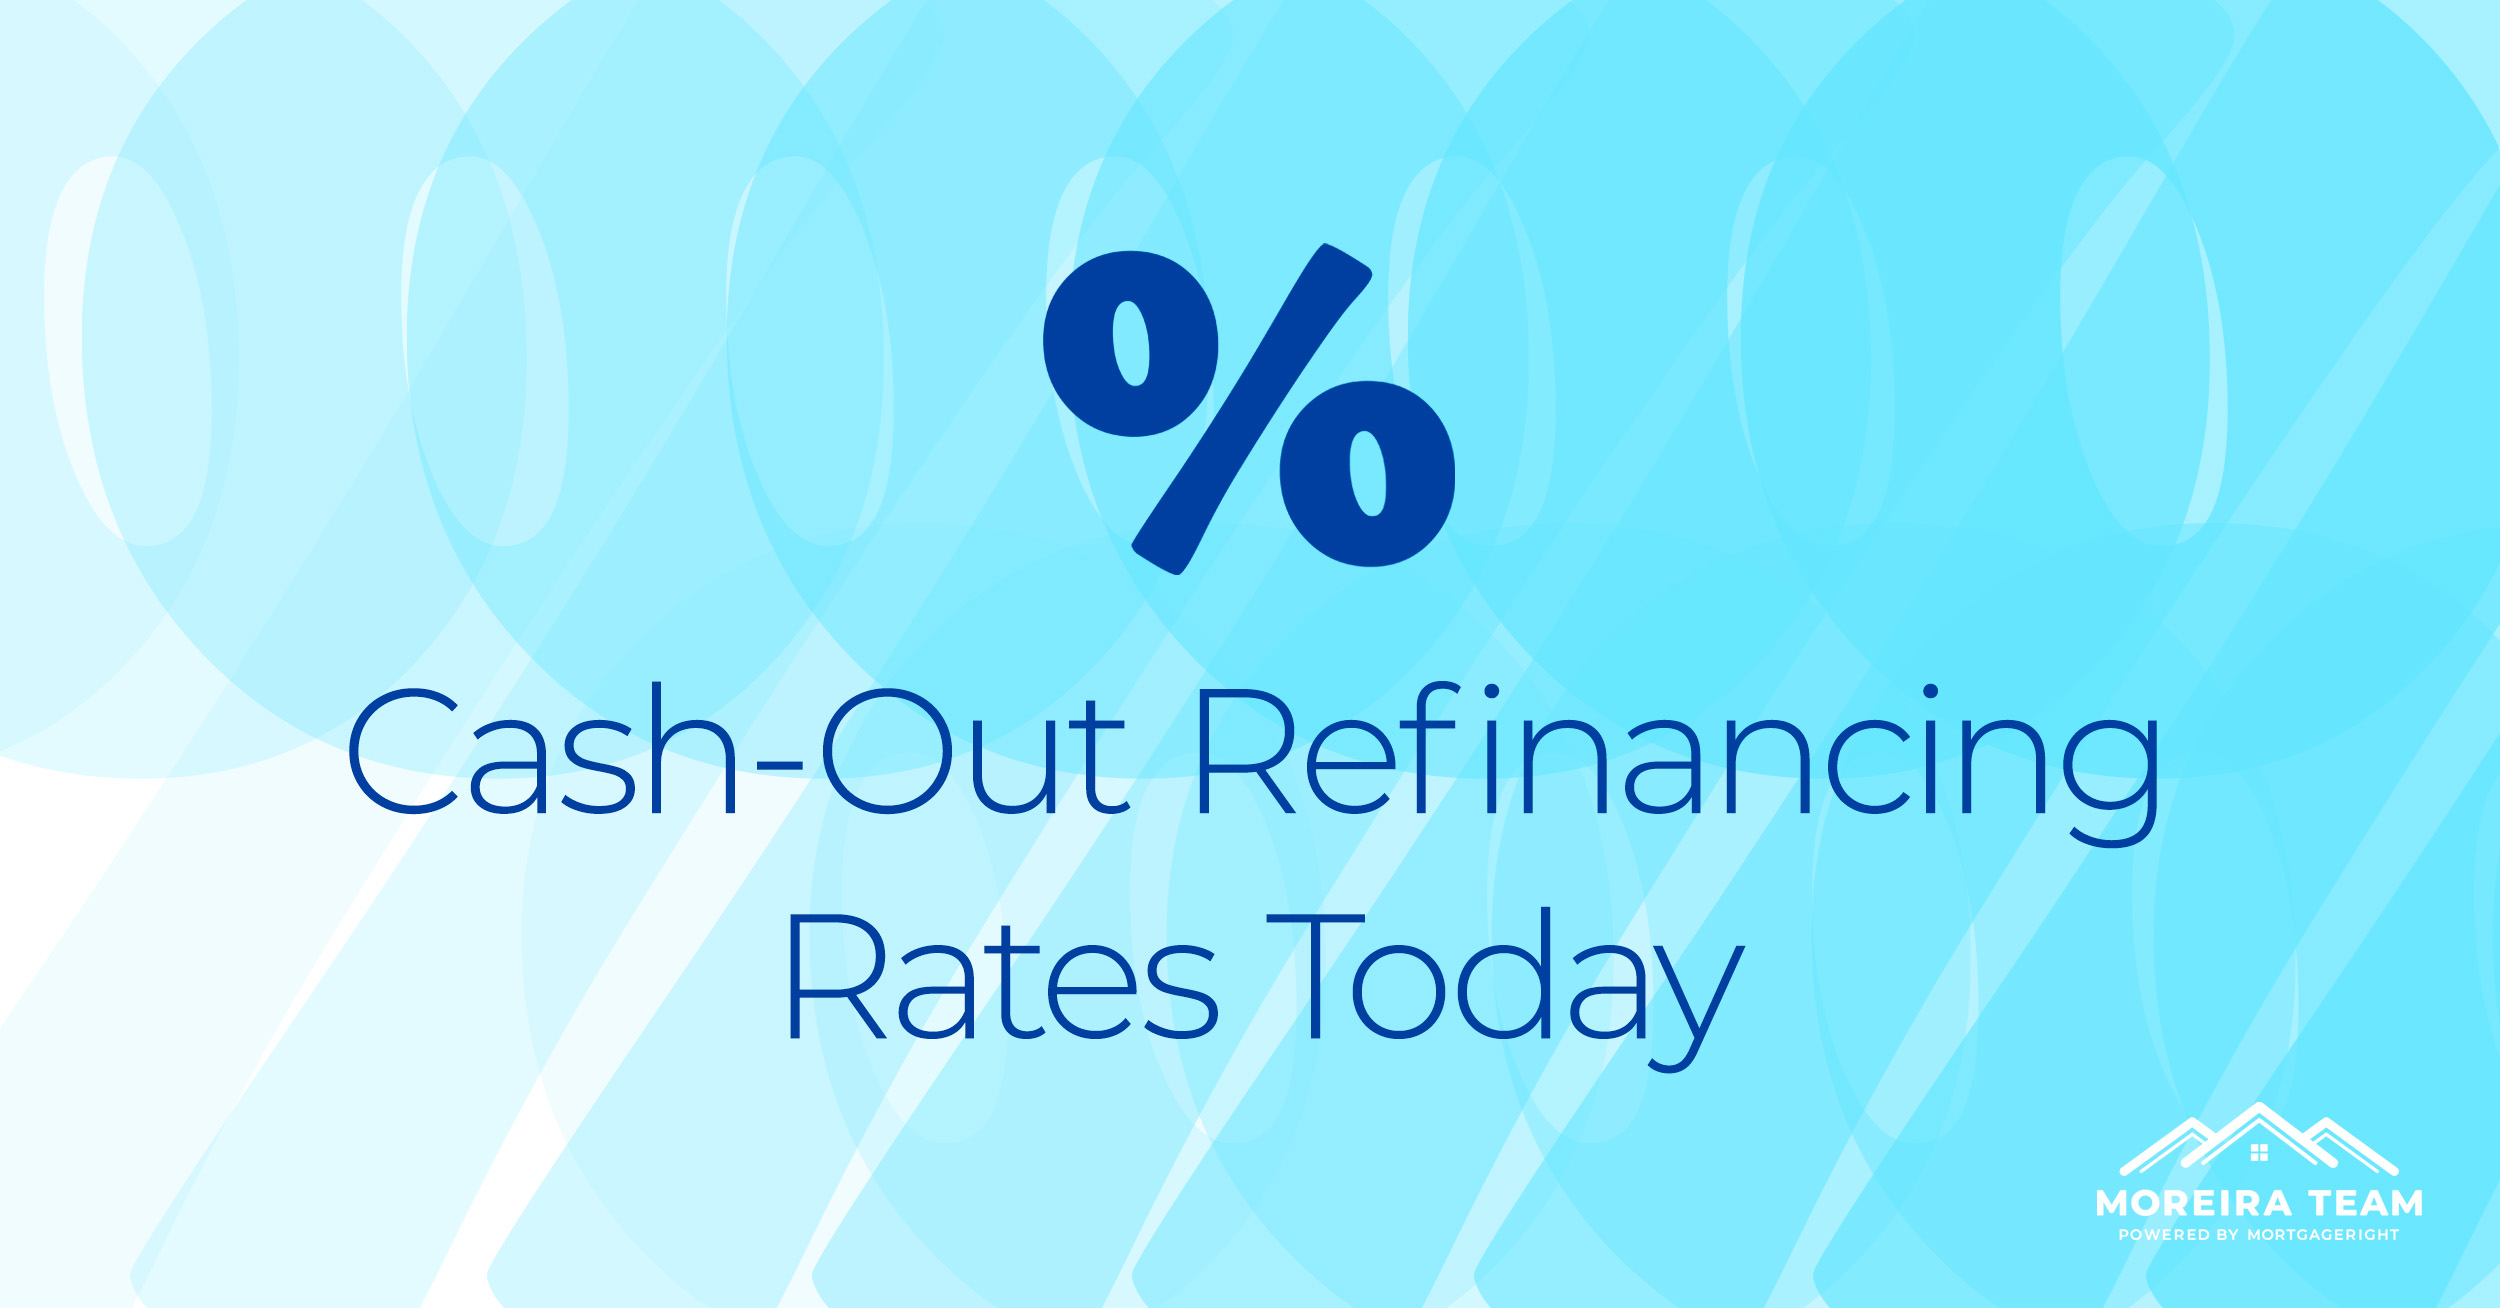 Cashout refinance rates today